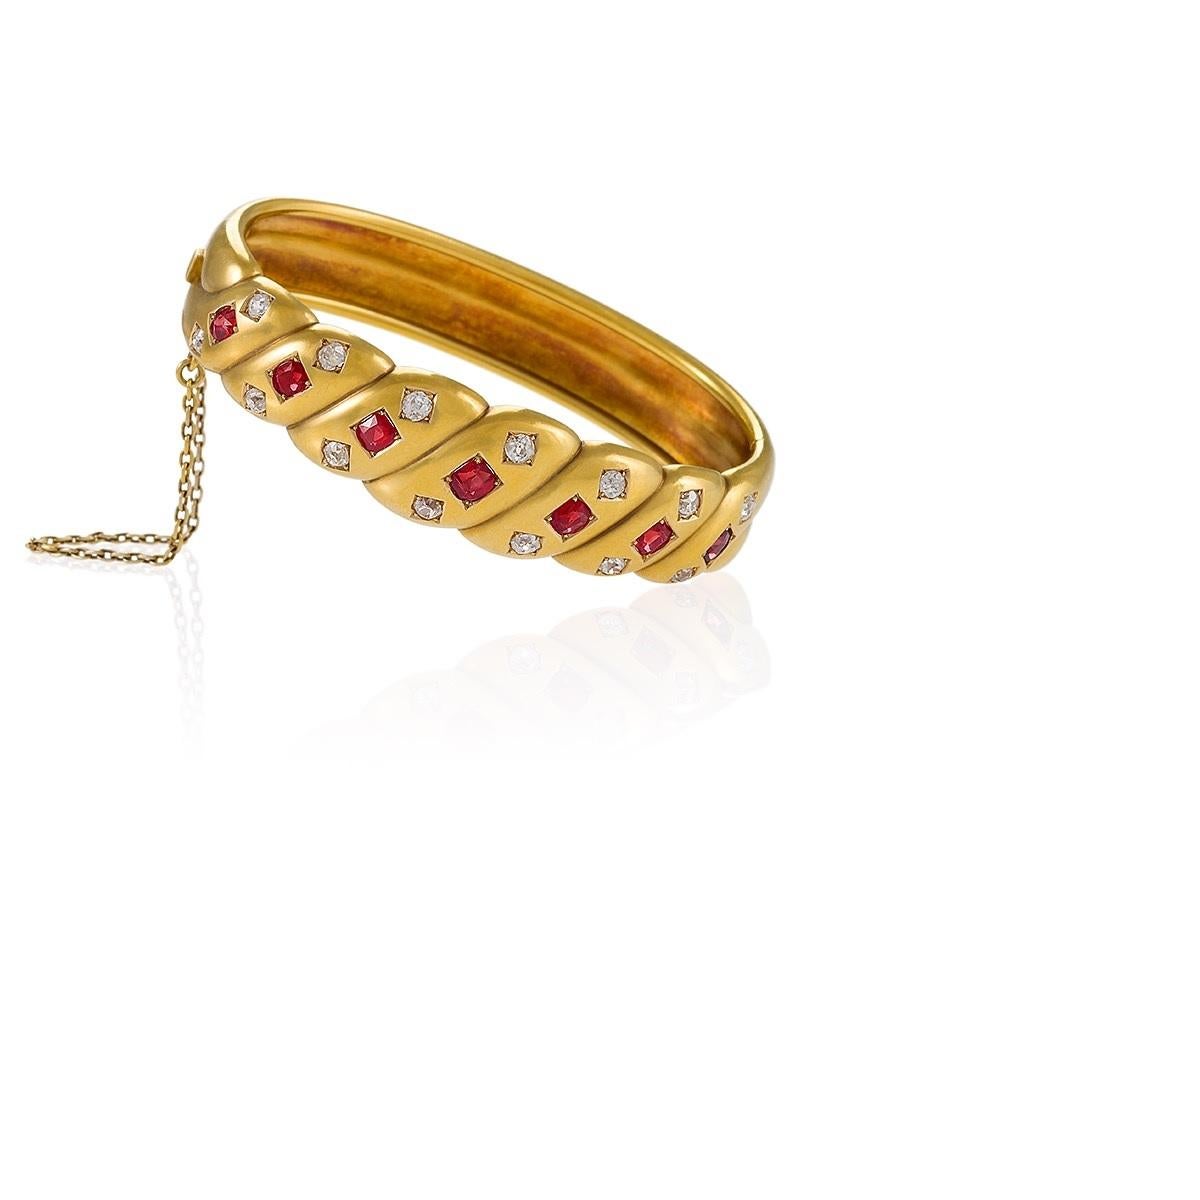 A late Victorian gold bangle bracelet with rubies and diamonds. The bangle bracelet features a simple and elegant twisted rope design that is energized by the 7 beautifully matched rubies, approximately 2.00 carats total weight, and 14 old mine cut